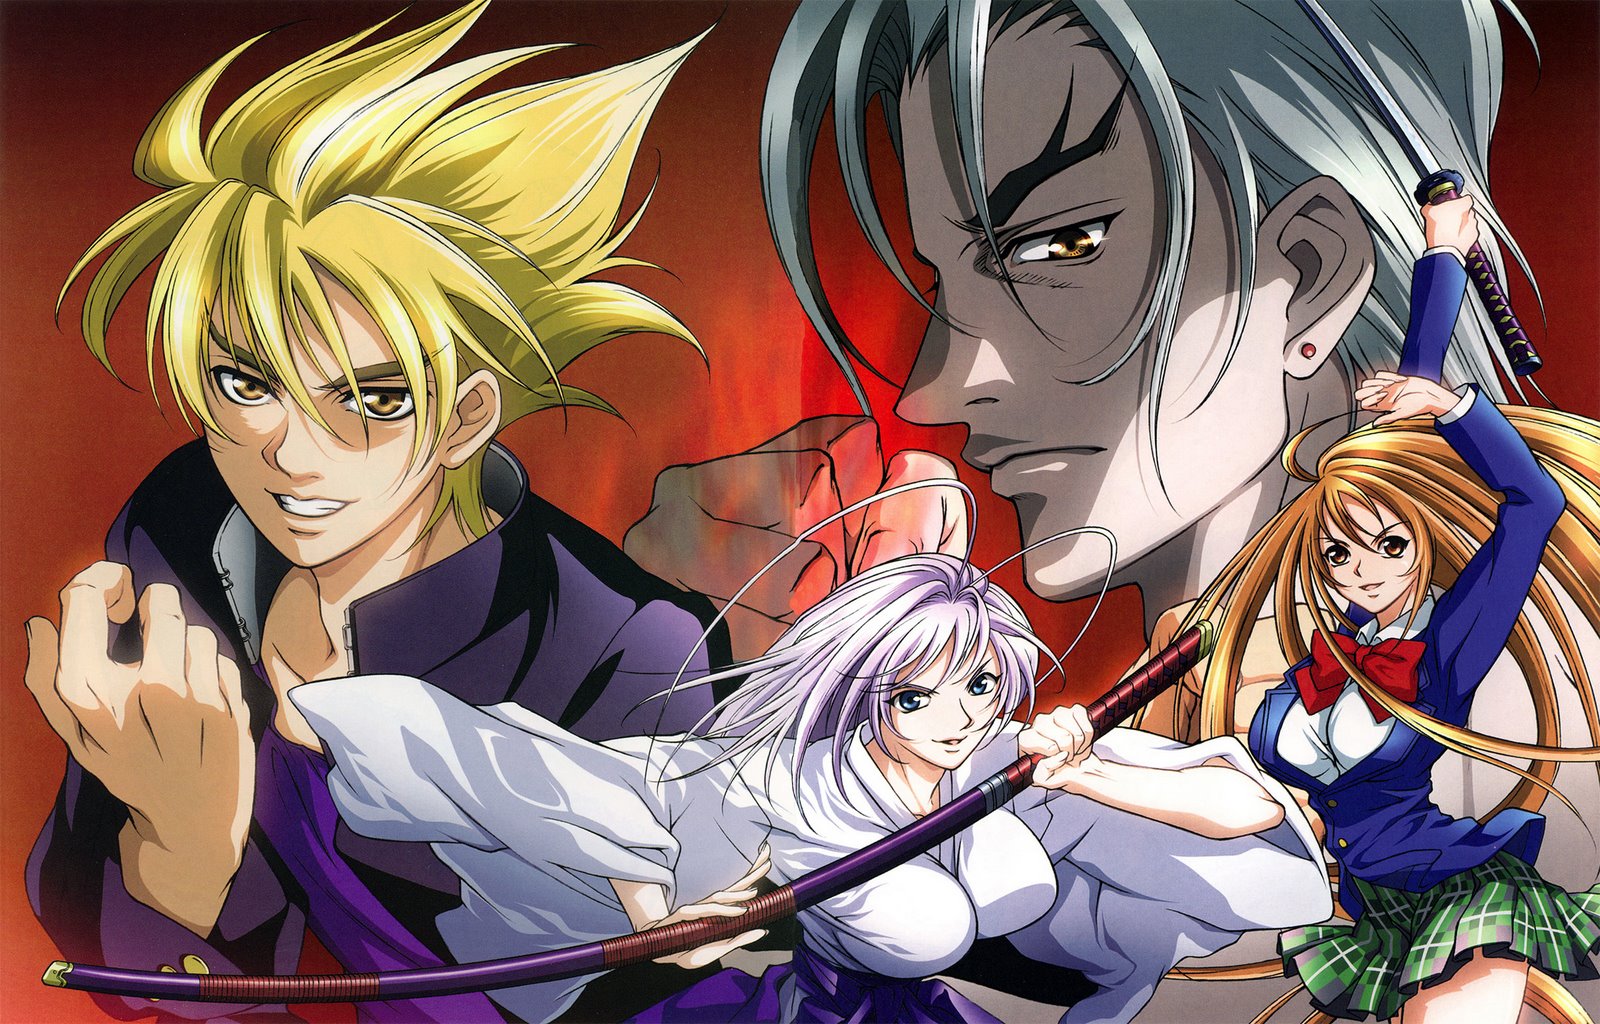 Rohil Reviews 2000s Anime: Tenjou Tenge - All Ages of Geek